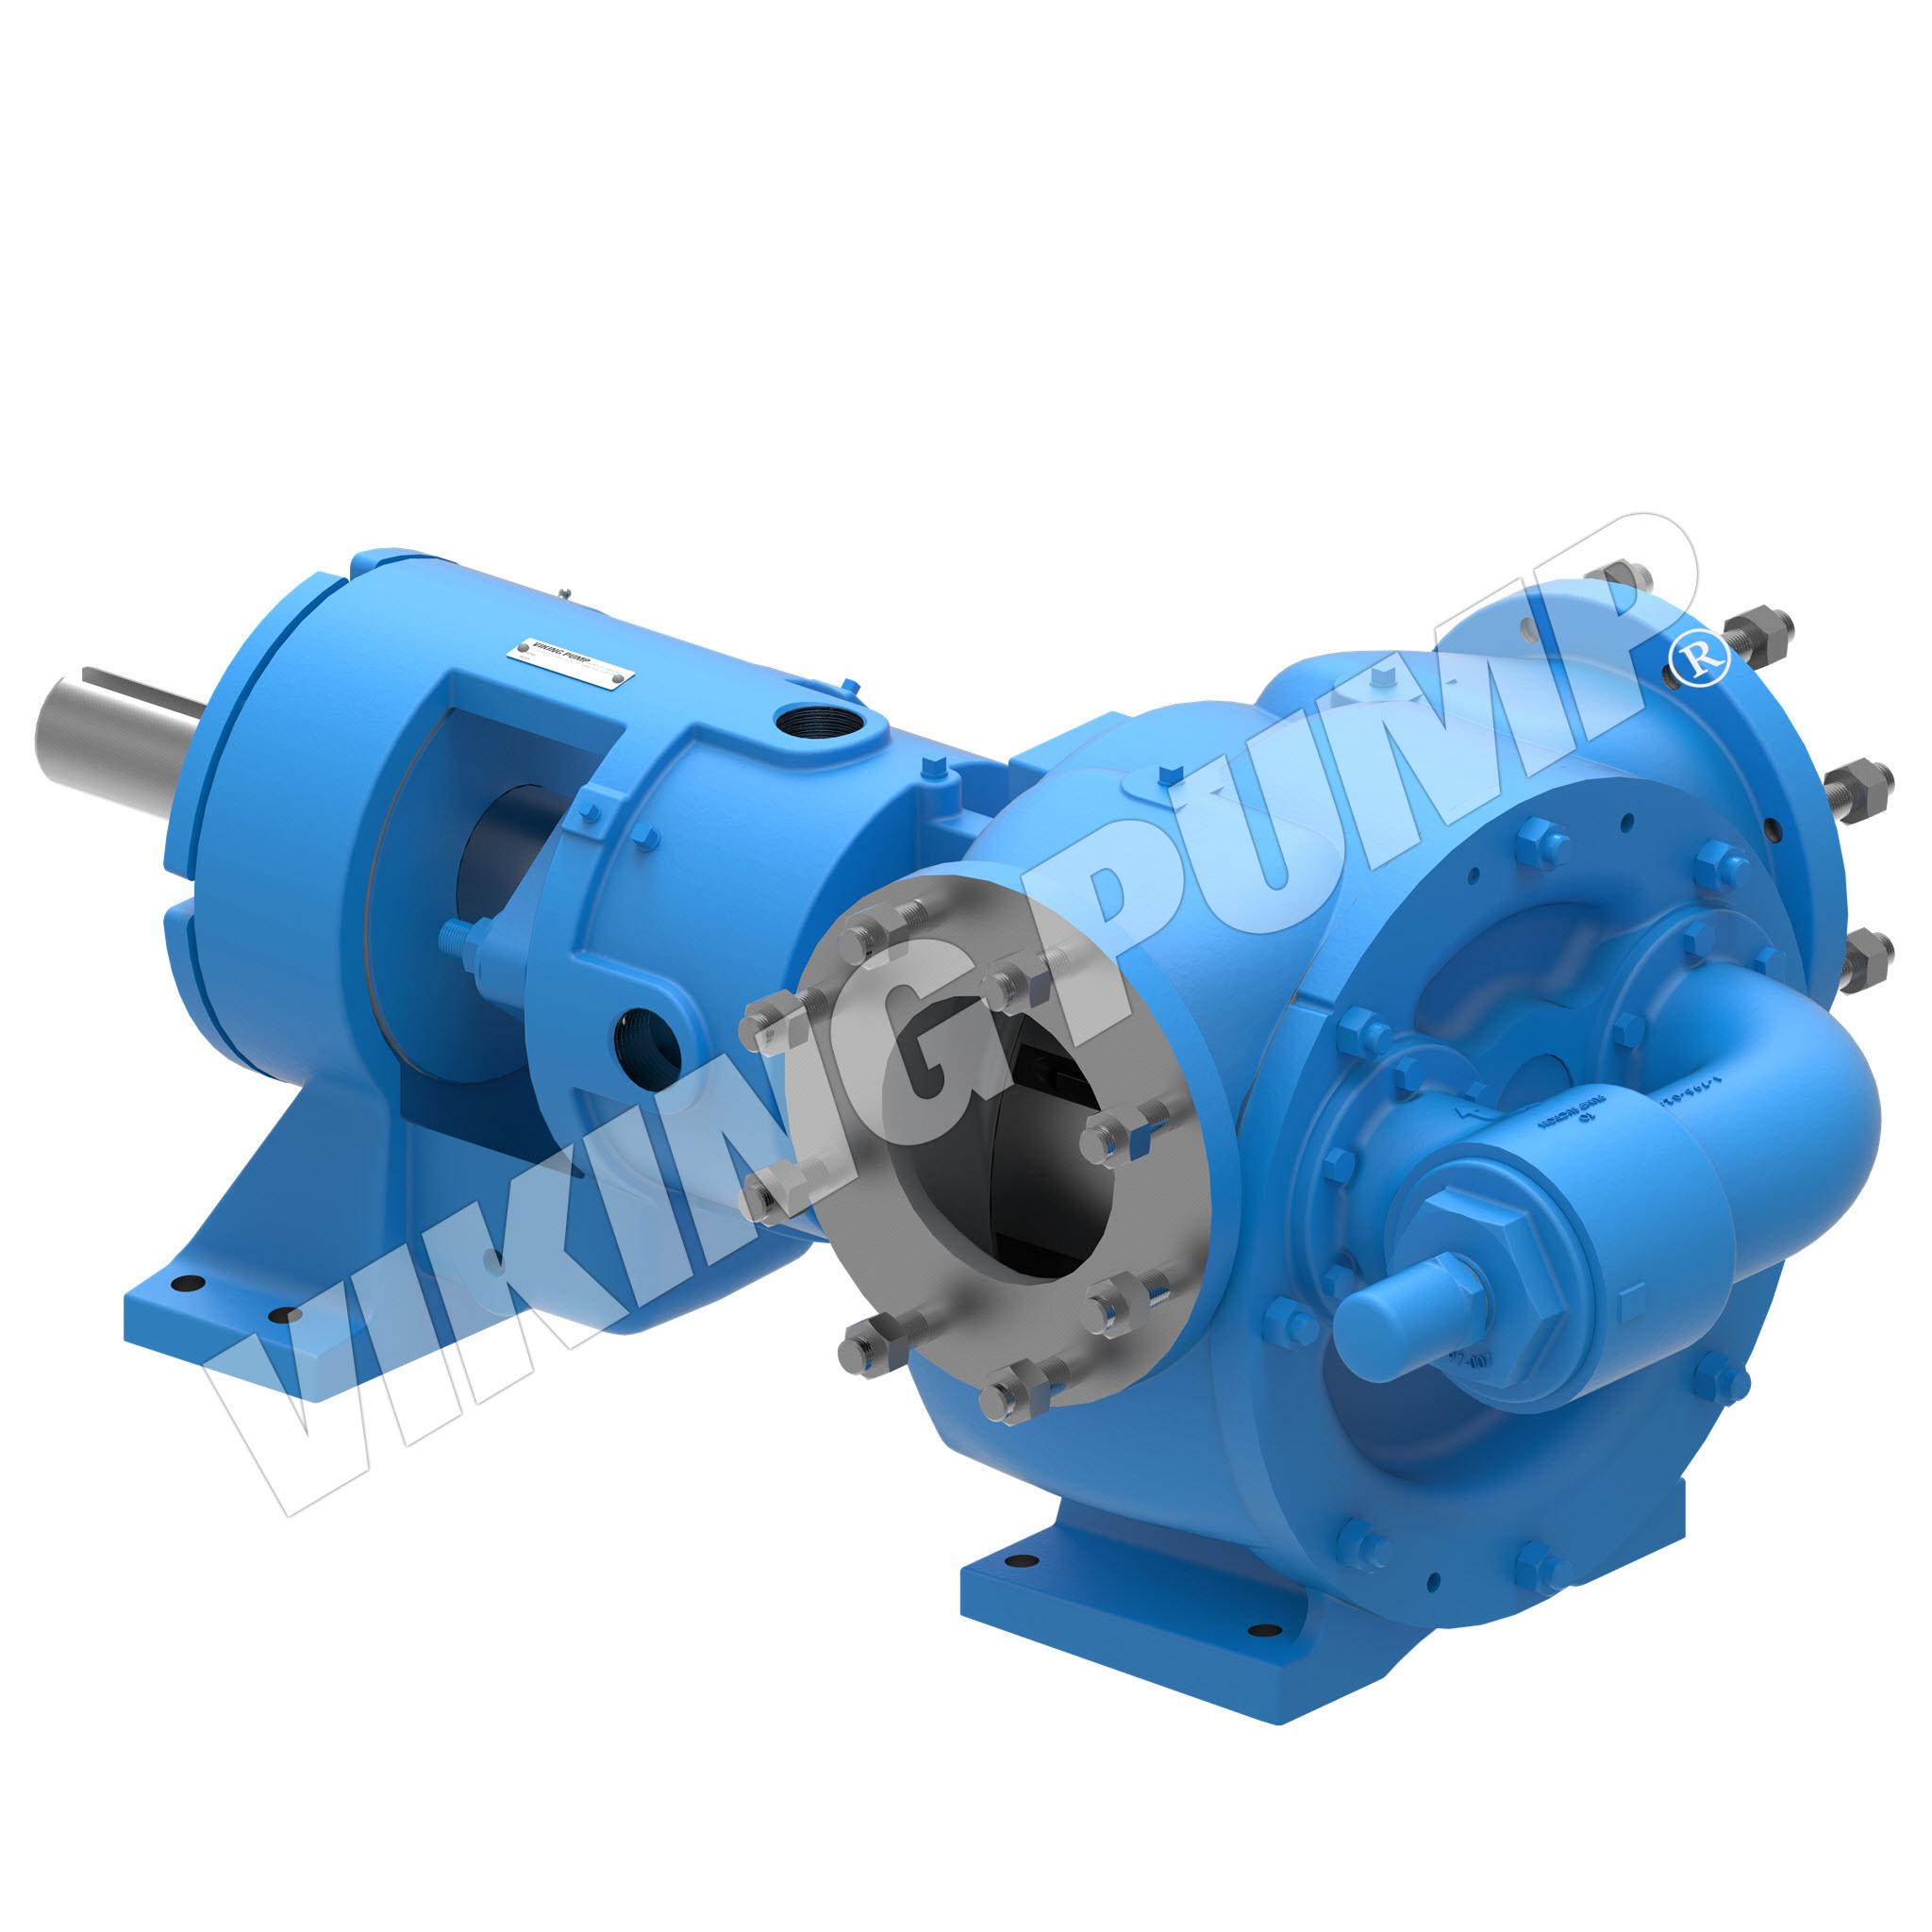 Model N4324A, Foot Mounted, Mechanical Seal, Relief Valve Pump